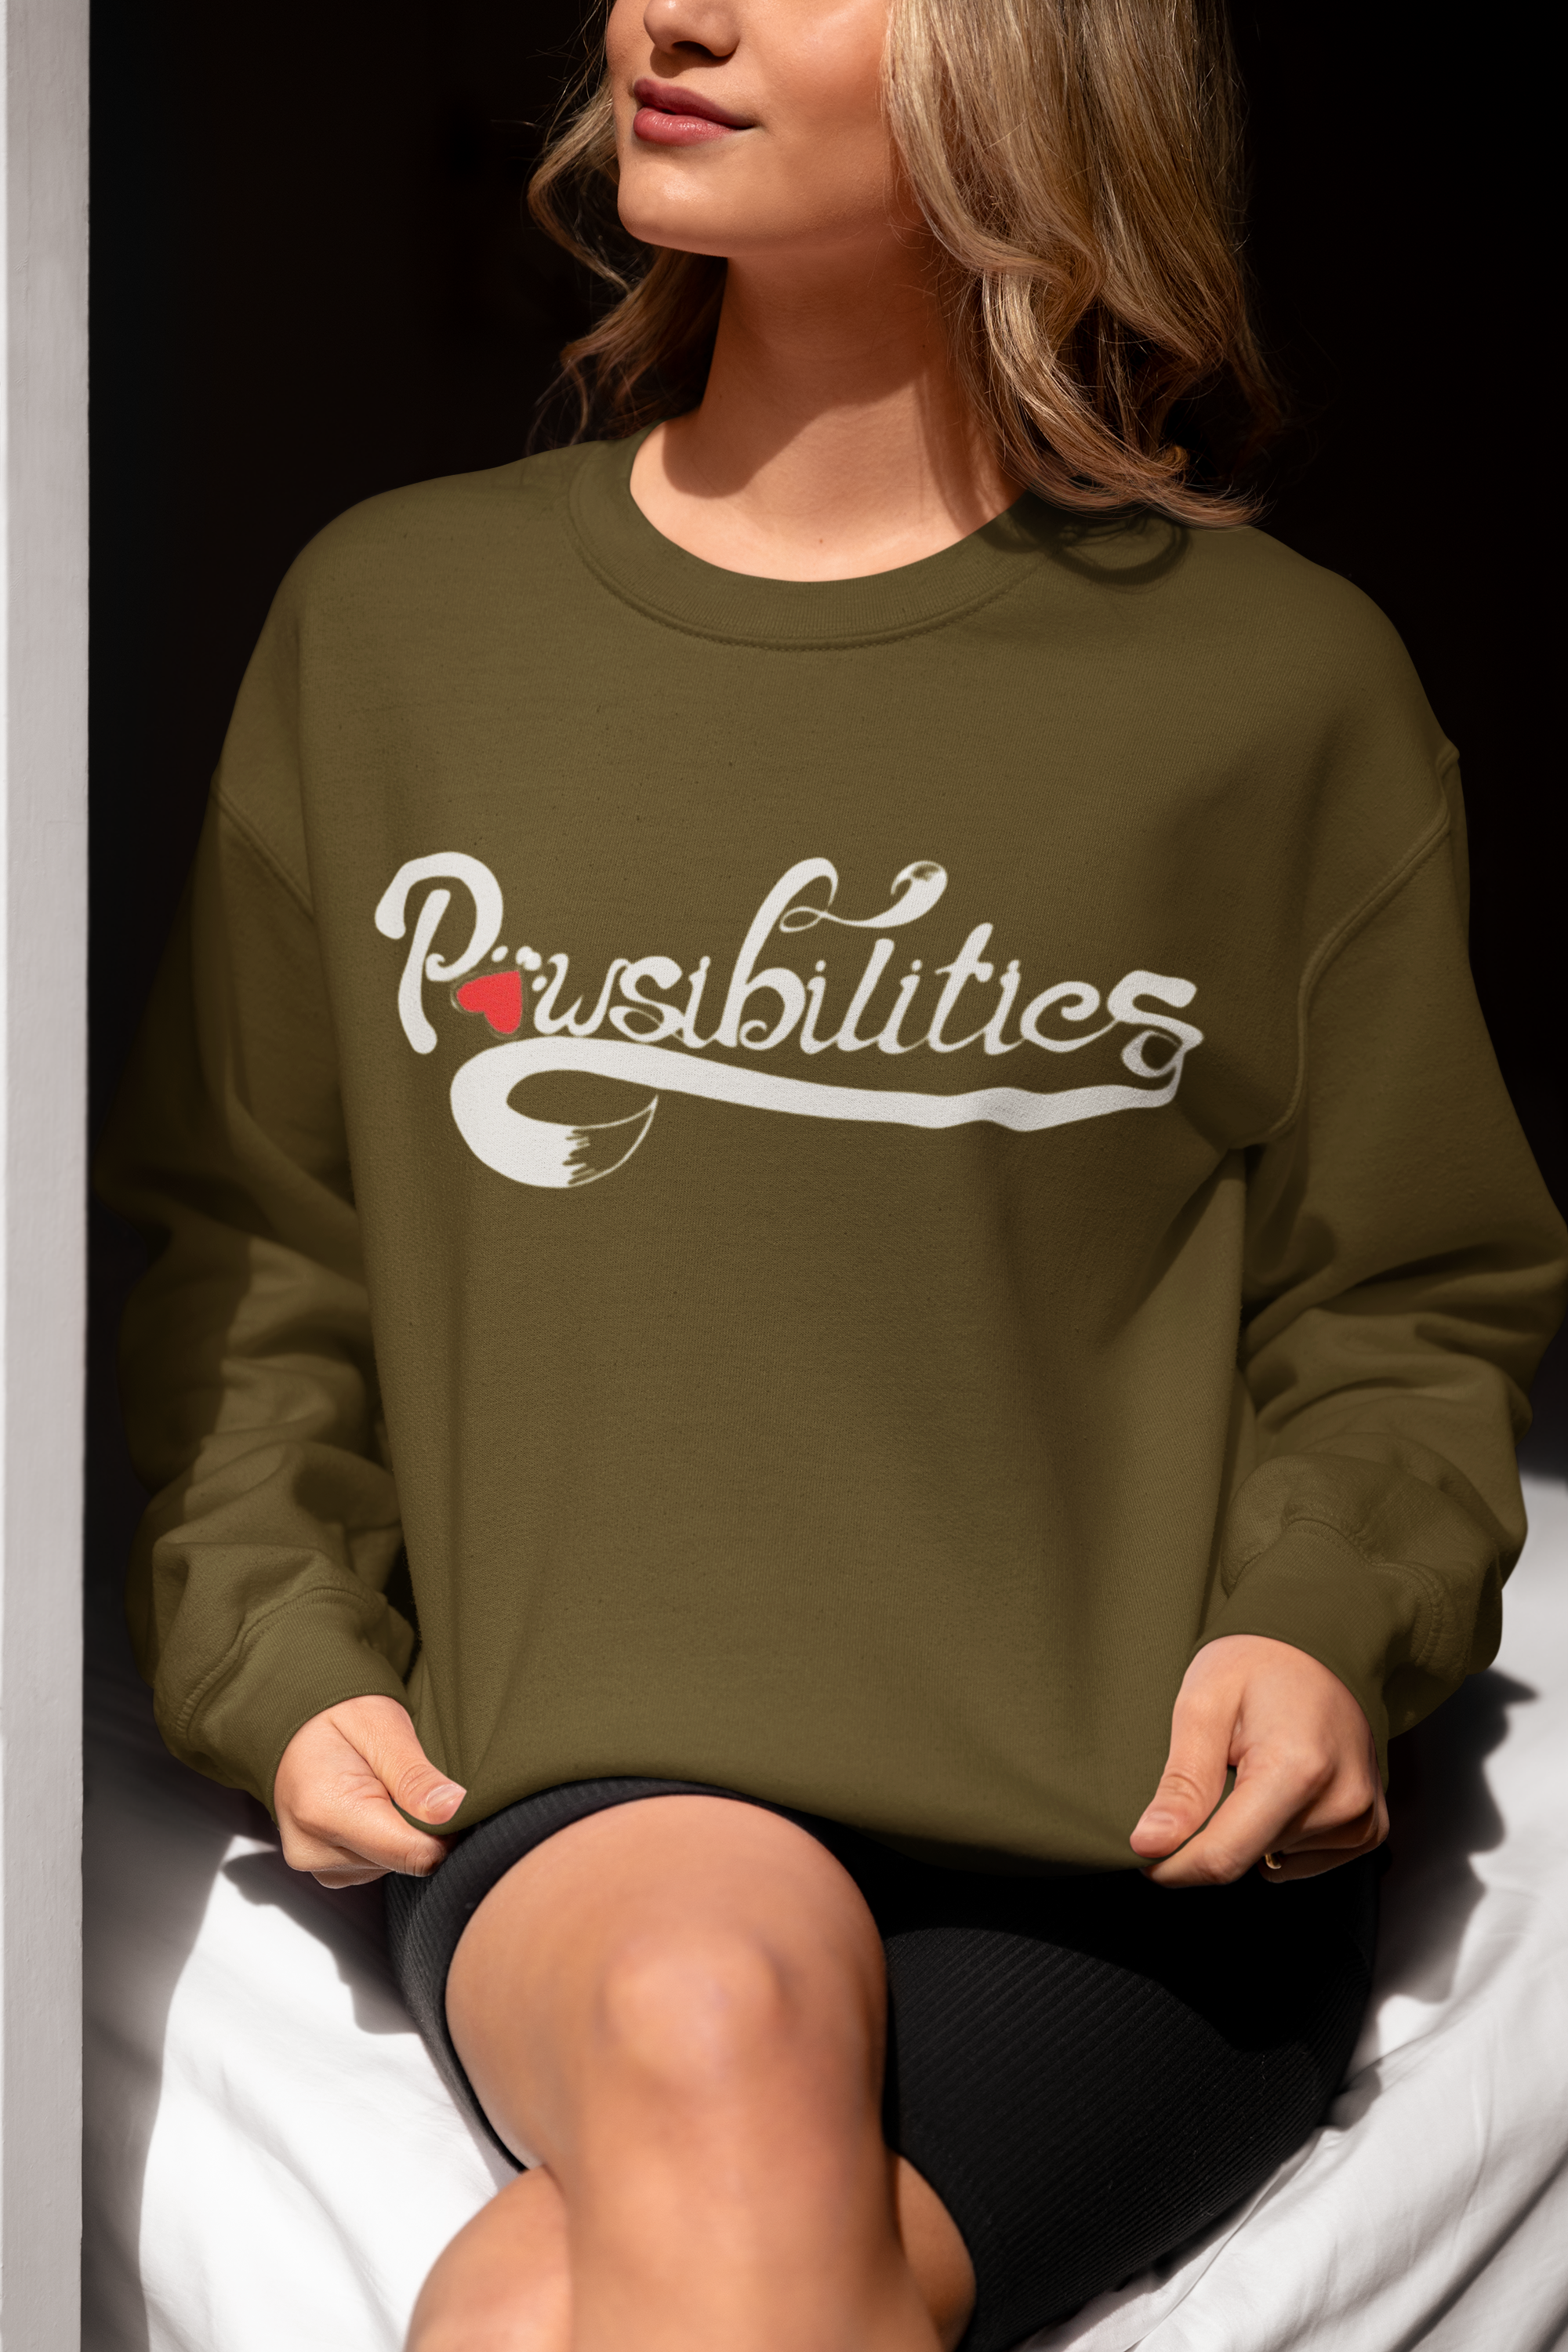 Pawsibilities Sweatshirts (Available in several colors)